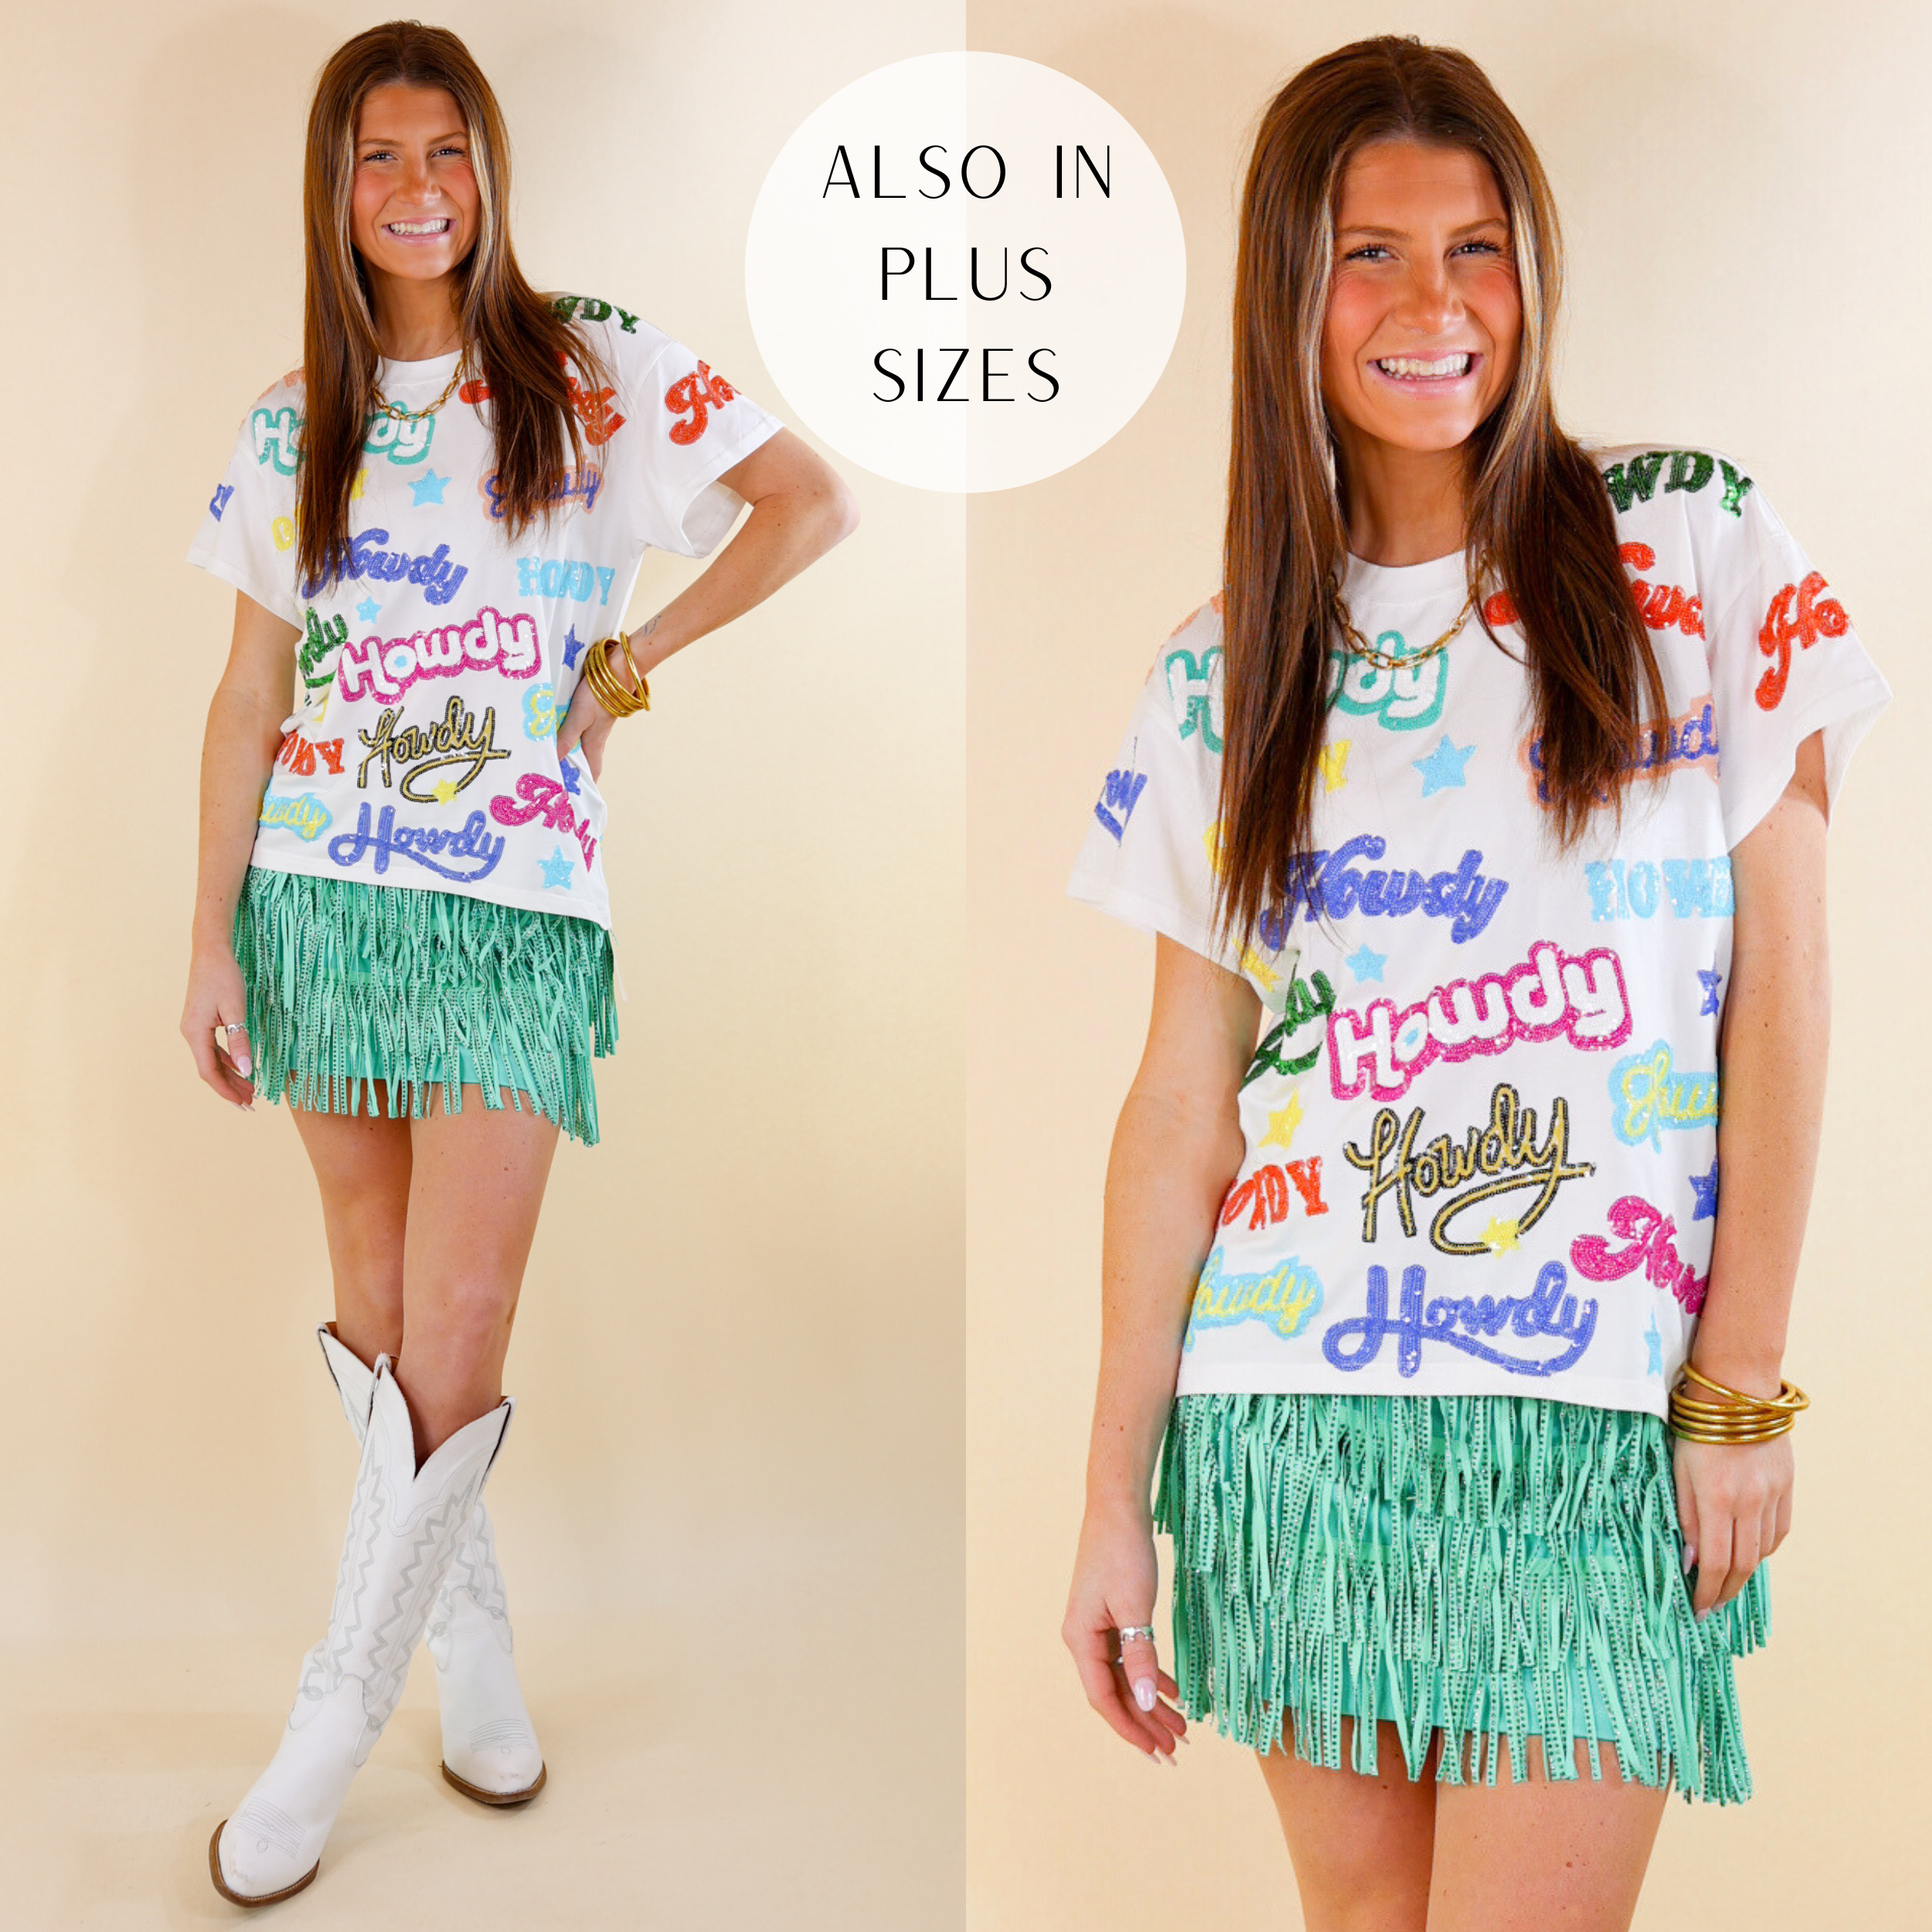 Model is wearing a white short sleeve top with the word "Howdy" printed all over in sequins in different colors and fonts. Model has it paired with a mint green fringe skirt, white boots, and gold jewelry.